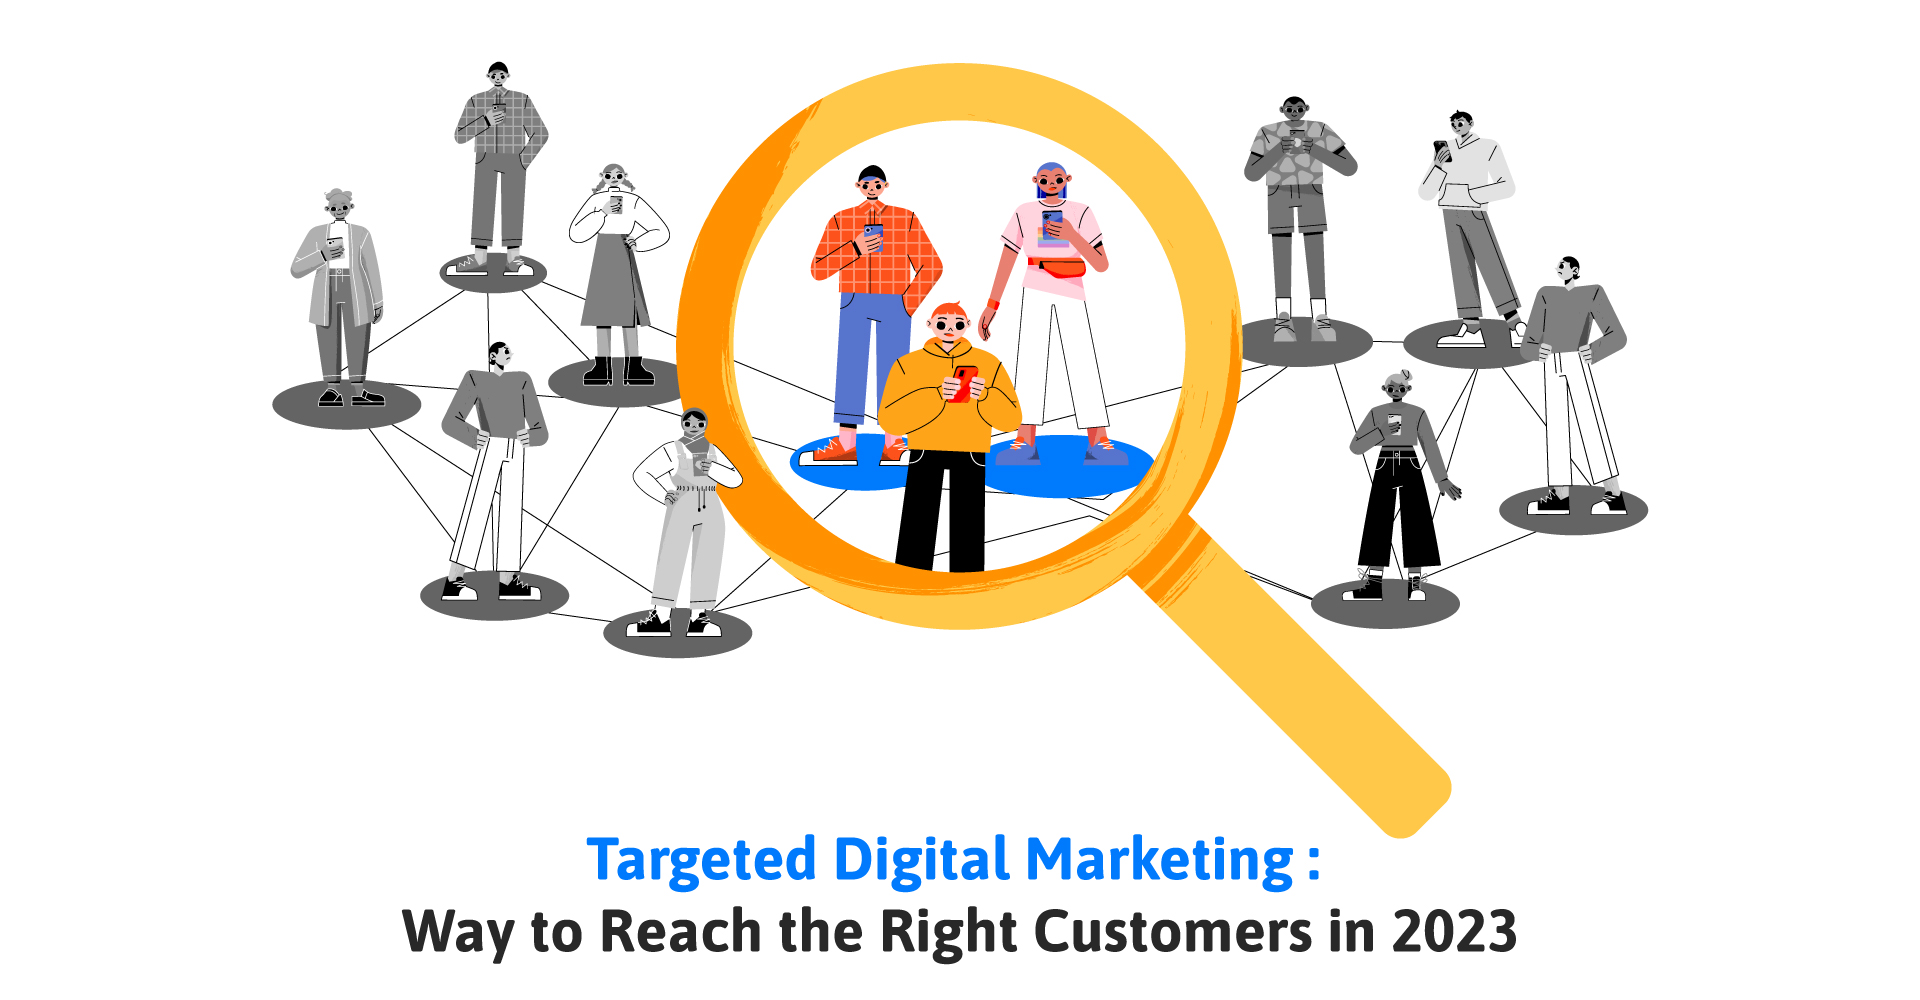 Targeted Digital Marketing :
Way to Reach the Right Customers in 2023